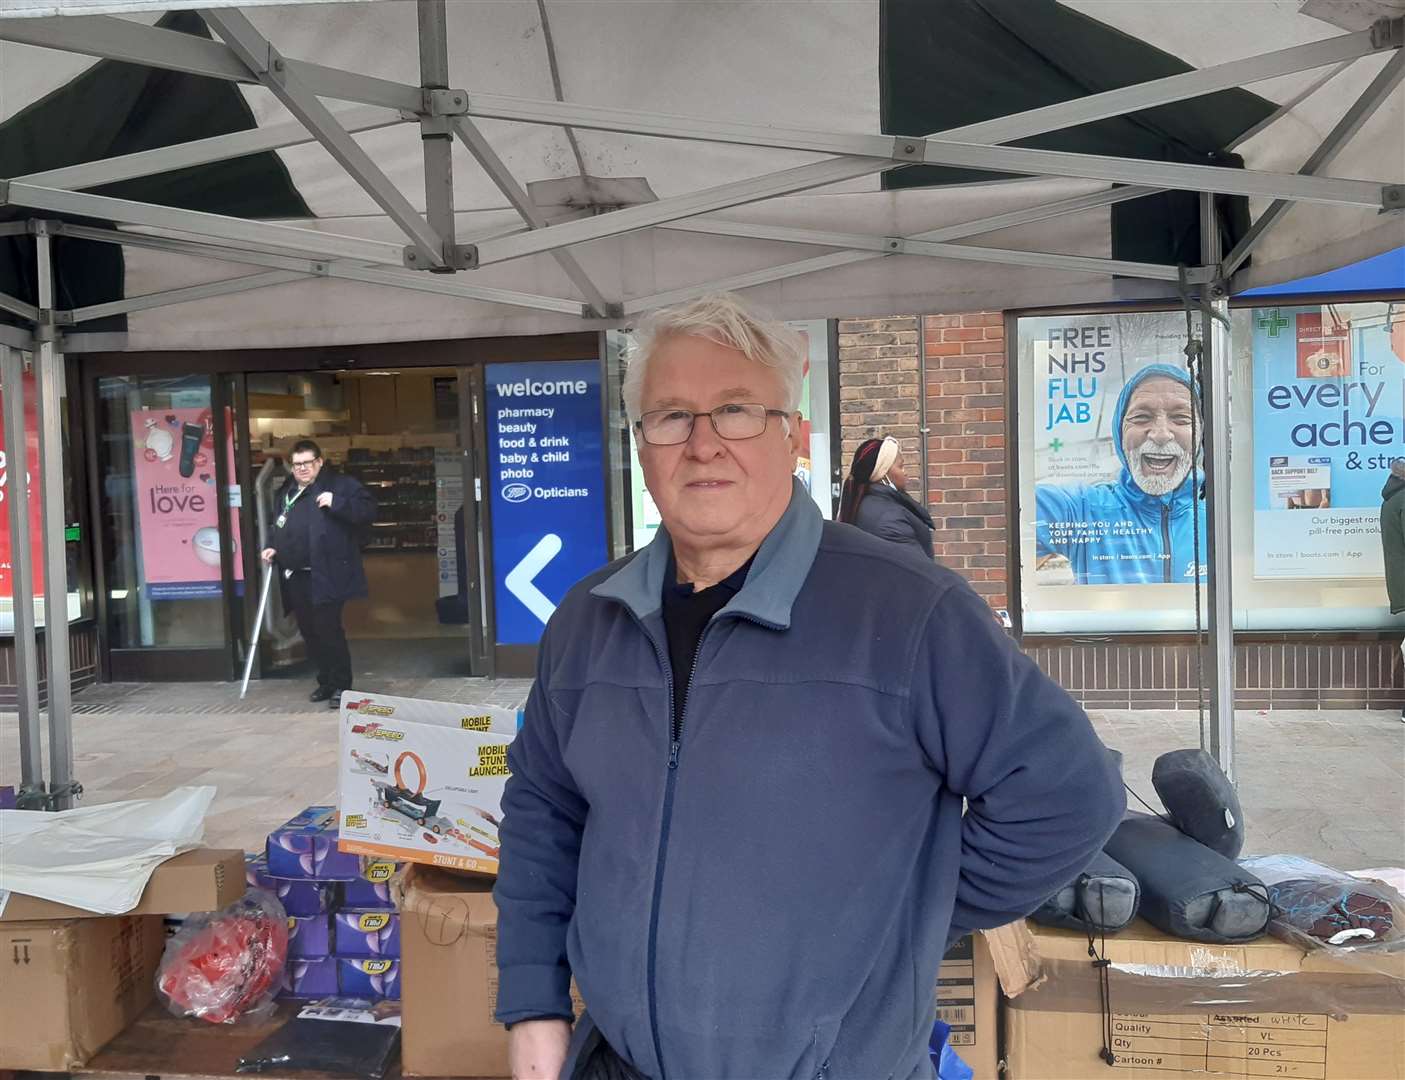 Andrew Parker has been running a stall in Dartford for more than 20 years. Photo: Sean Delaney